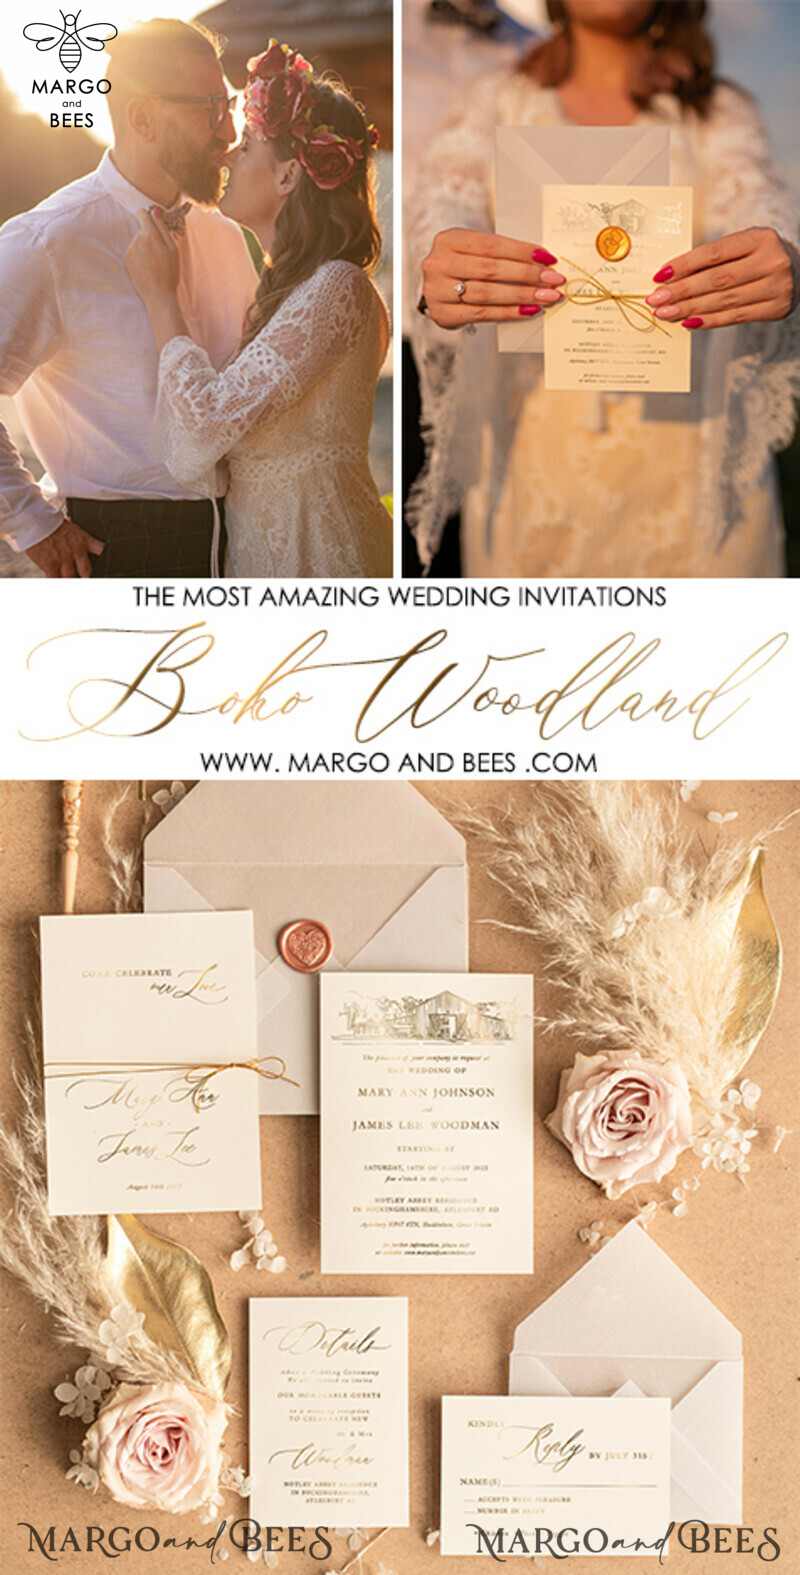 Luxury Bohemian Wedding Invitations: Customized Venue Sketch and Elegant Nude Invitation Suite with Golden Shine-5